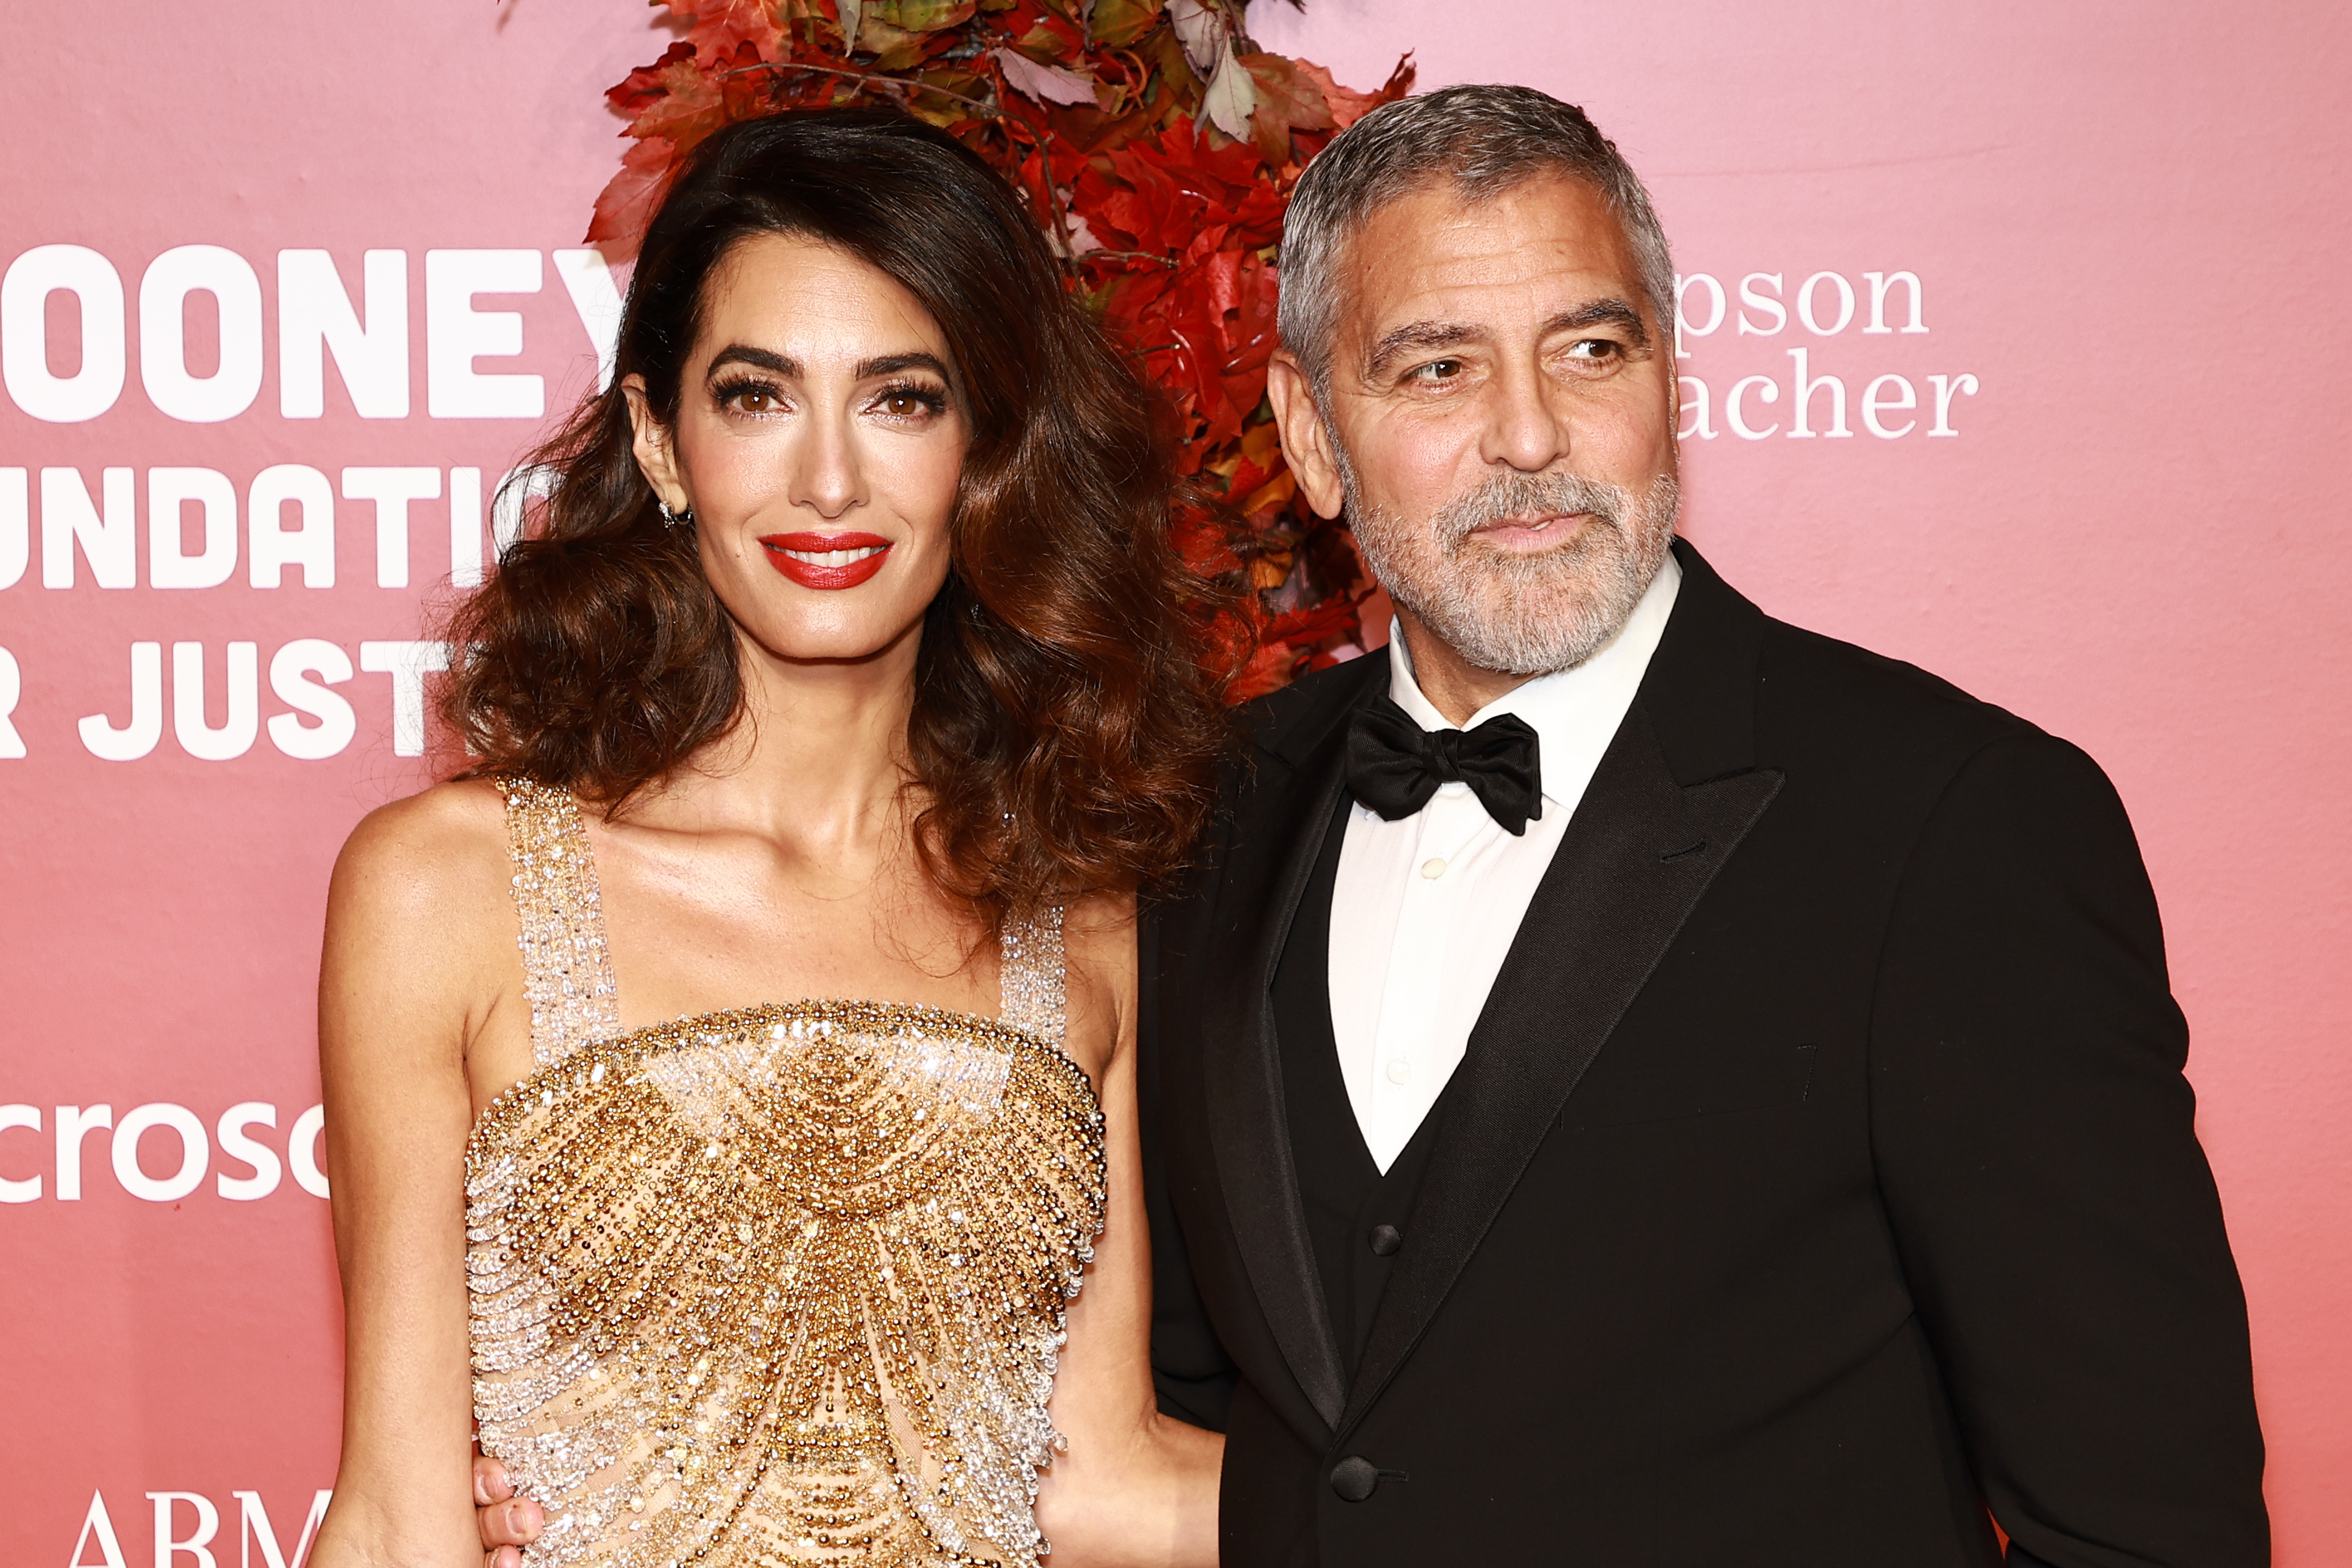 George Clooney on His Marriage to Wife Amal: 'We Collaborate on Everything'